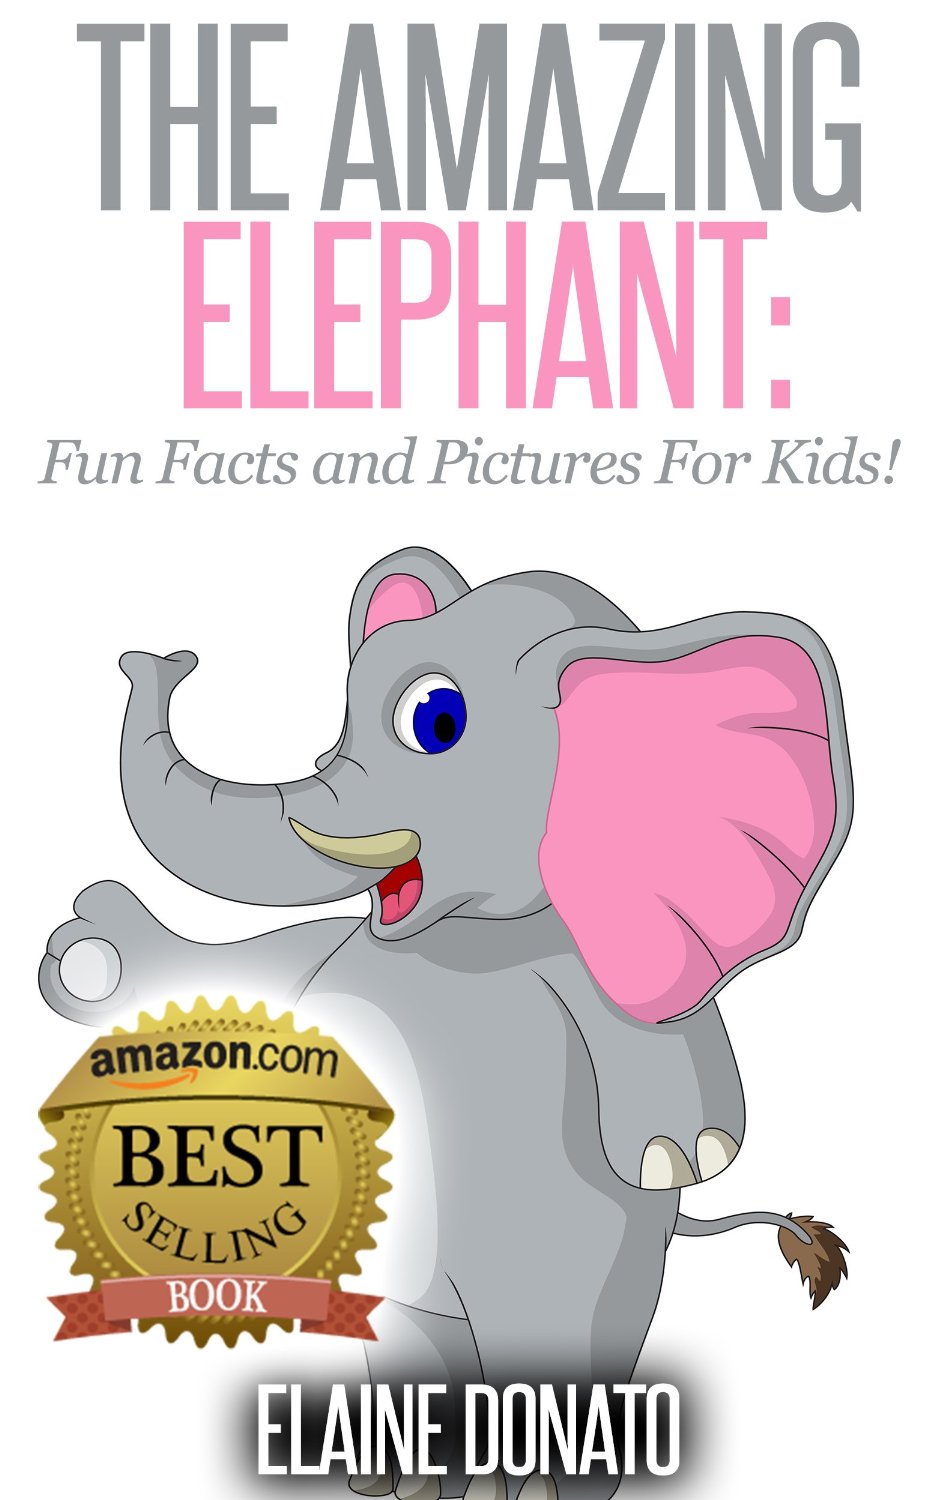 The Amazing Elephant: Fun Facts and Pictures for Kids! by Elaine Donato